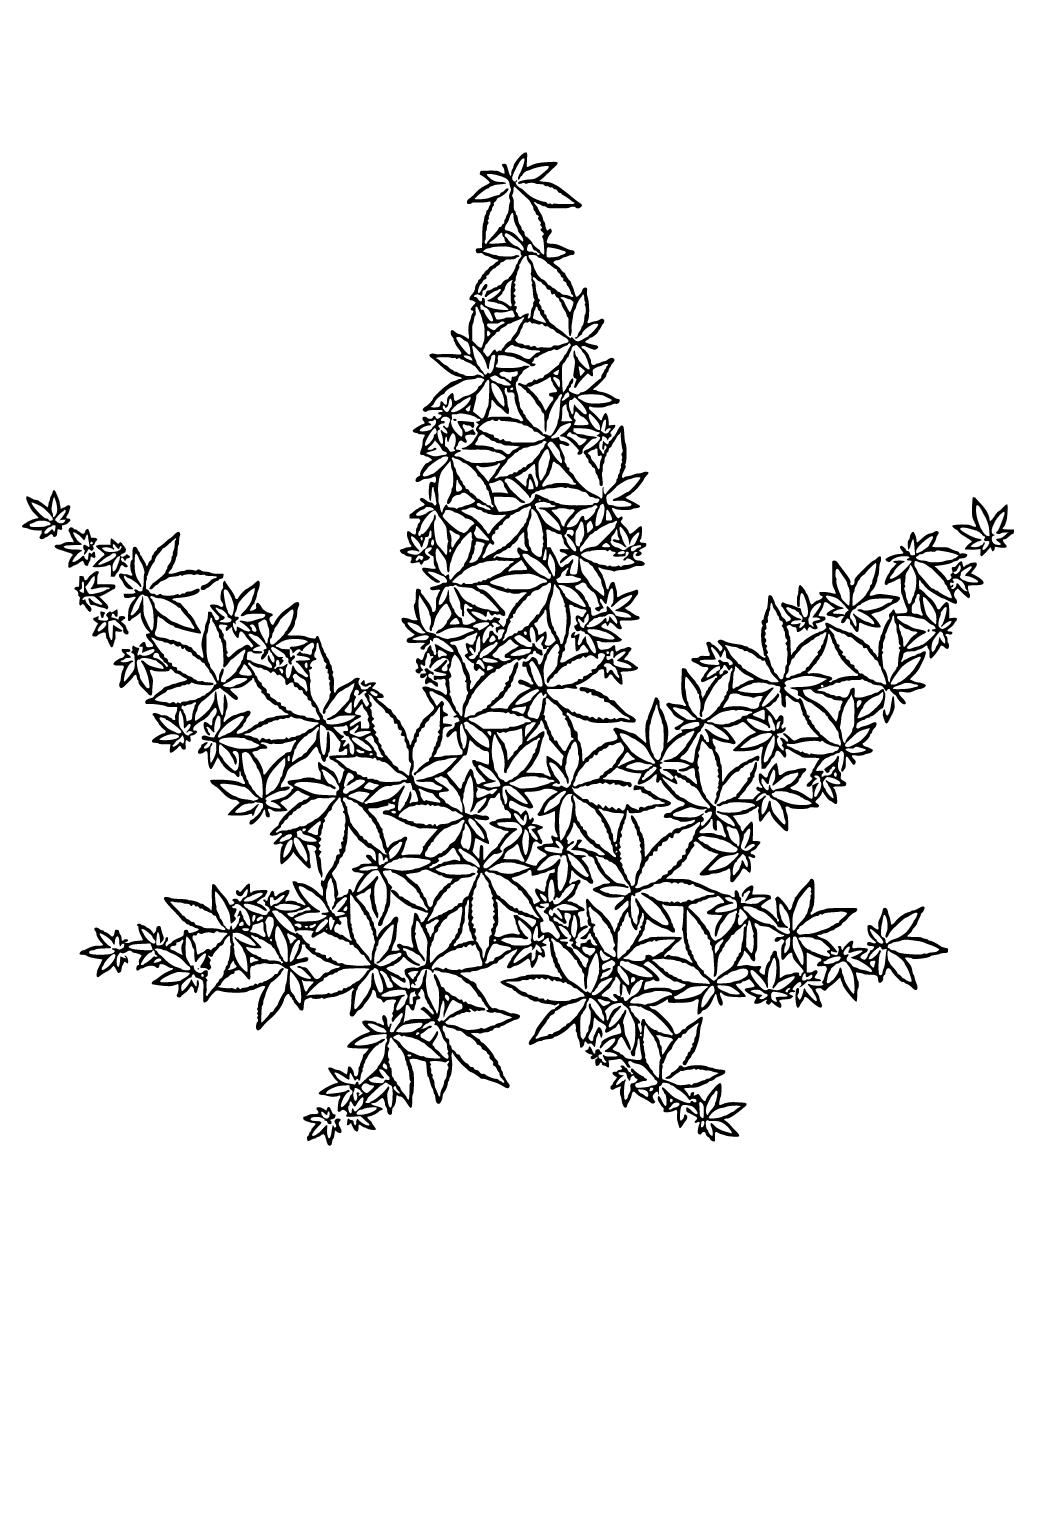 Free Printable Weed Leaves Coloring Page, Sheet And Picture For Adults And  Kids (Girls And Boys) - Babeled.Com